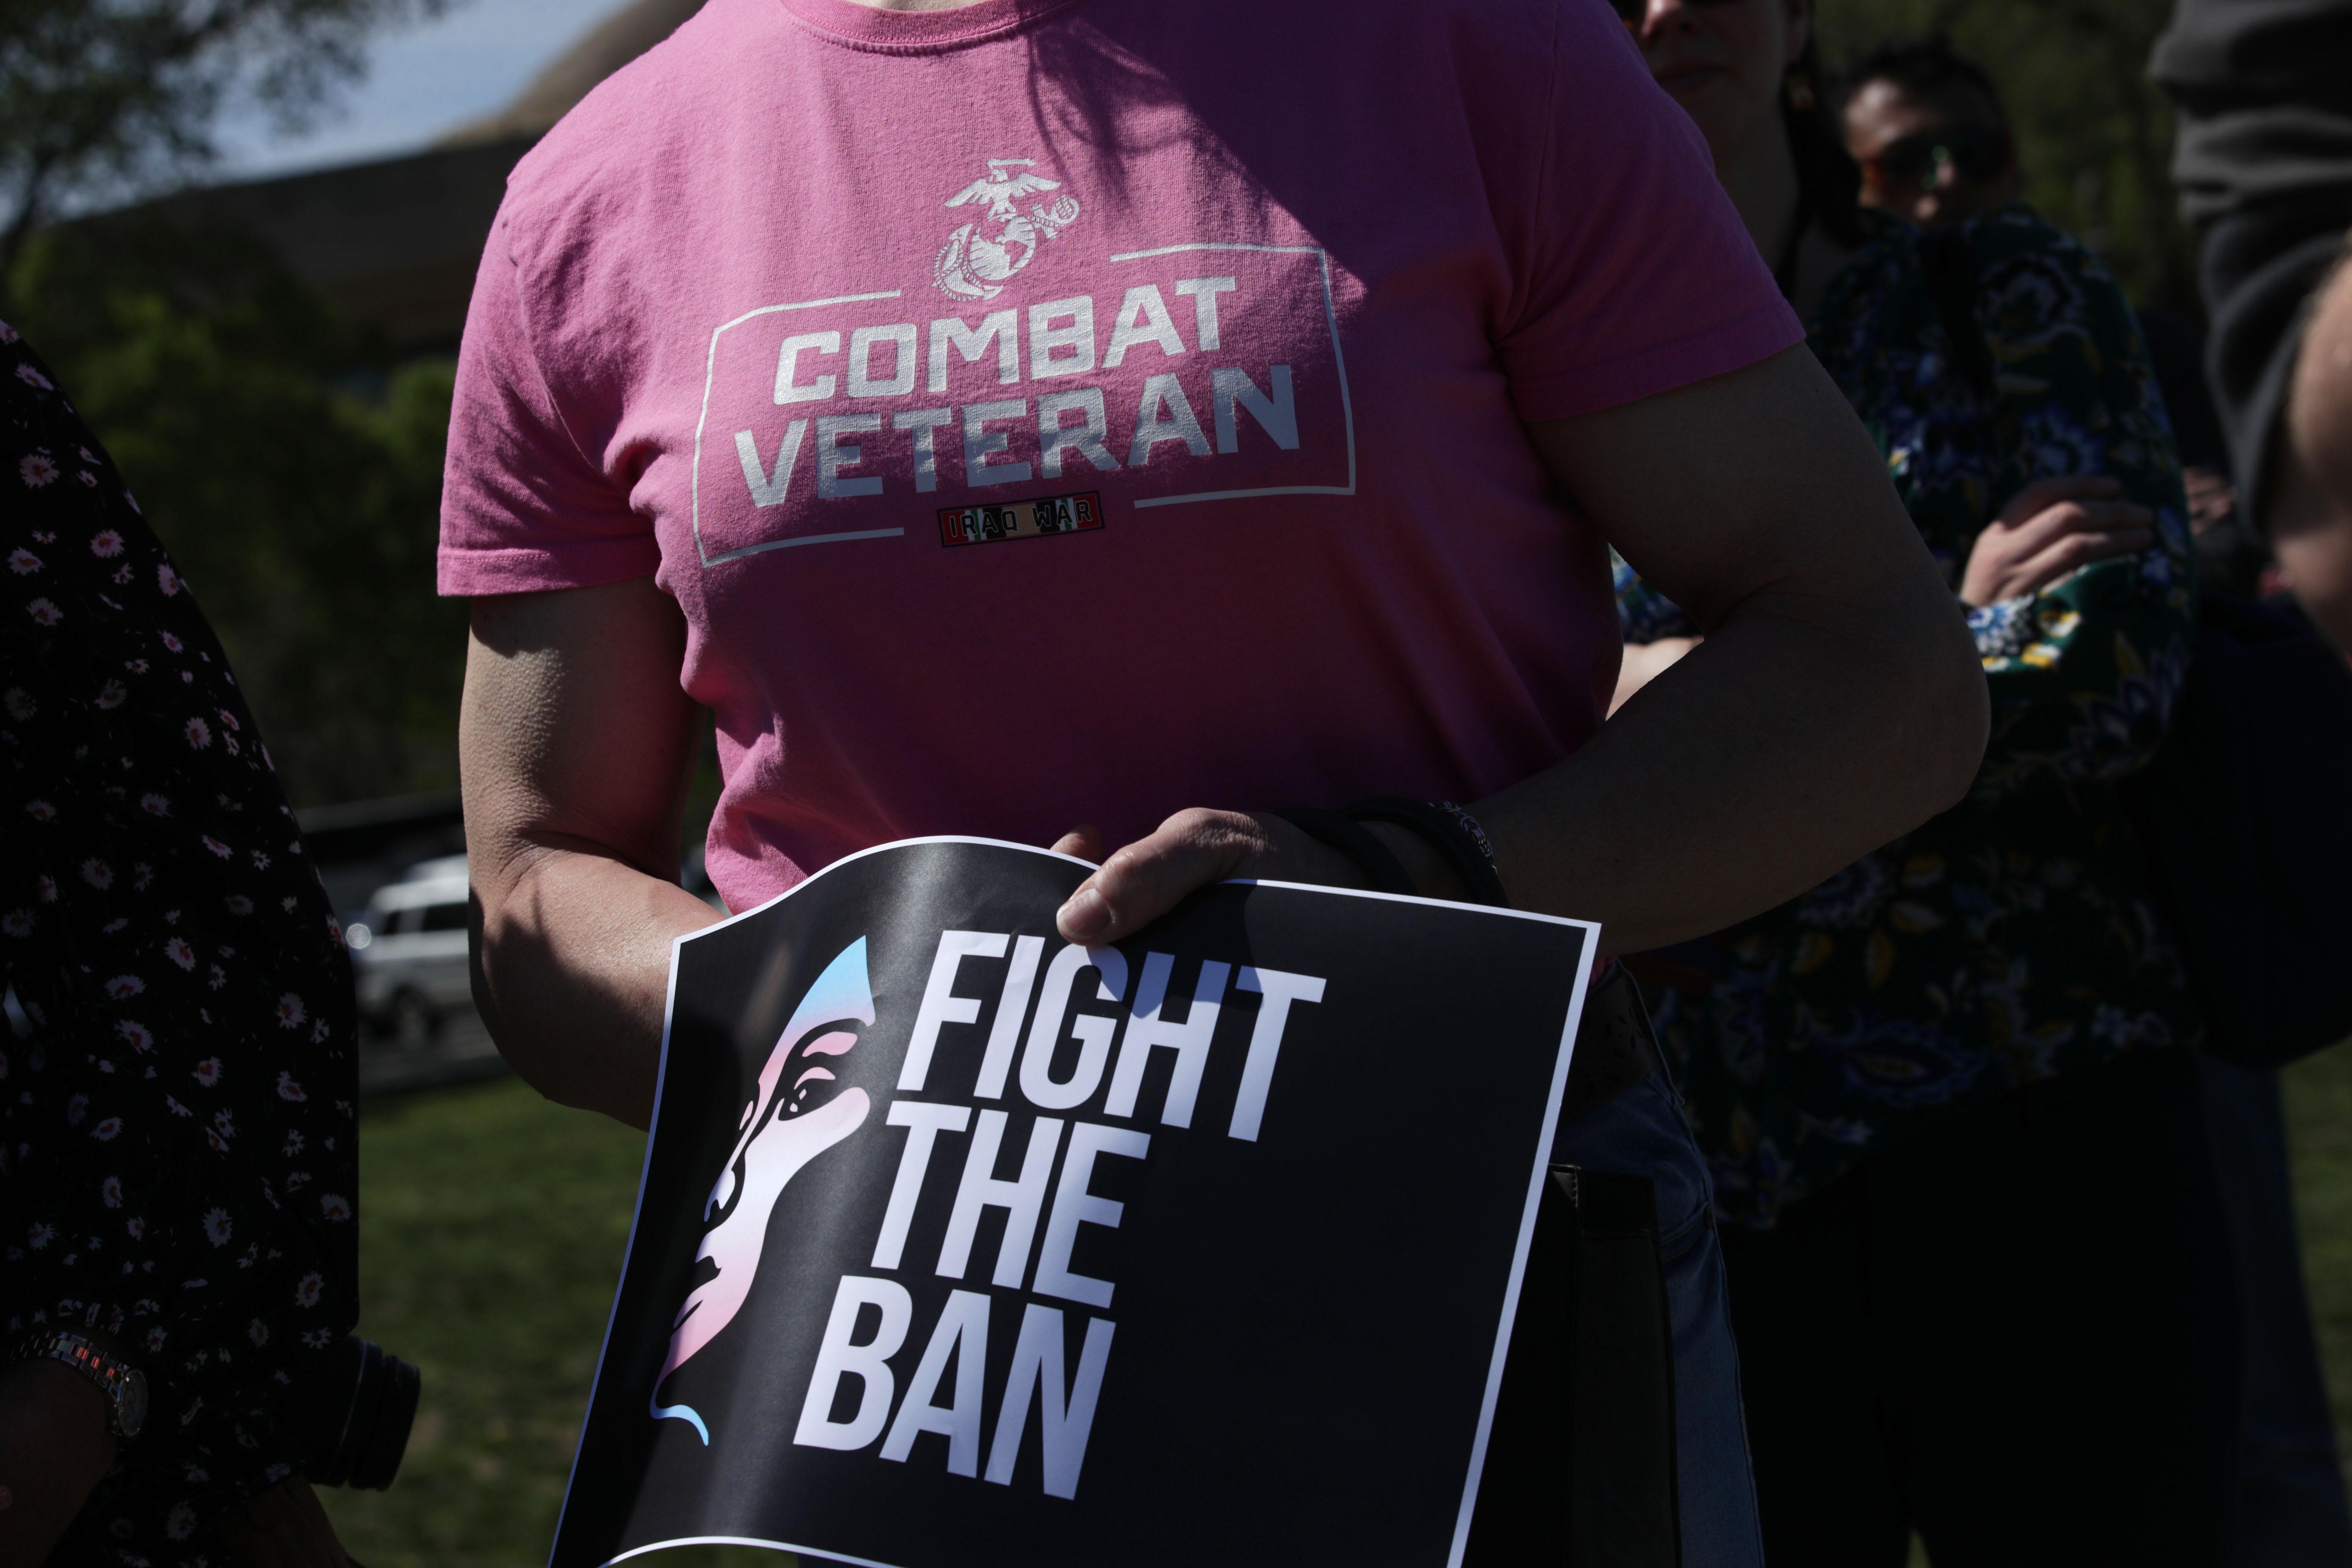 A person wearing a "Combat Veteran" T-shirt holds a sign that says "Fight the Ban."